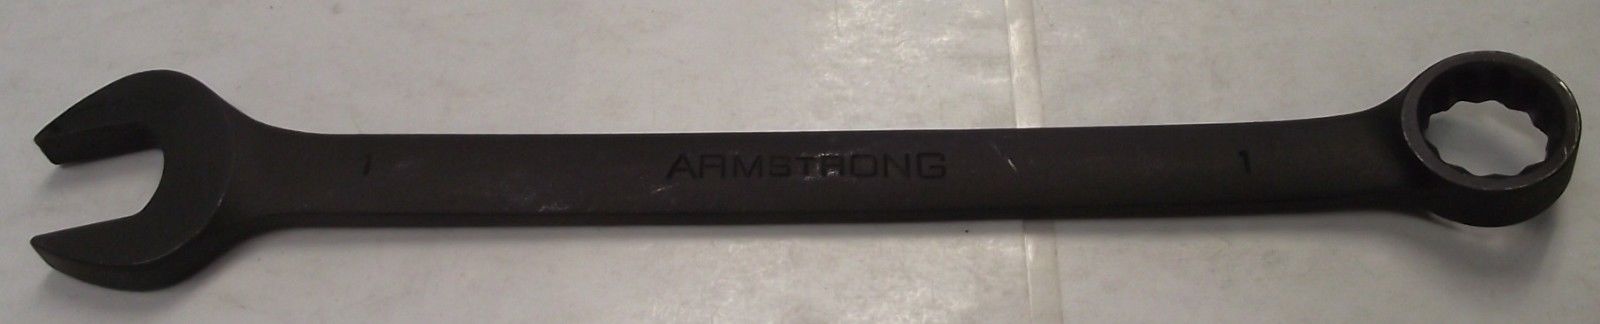 Armstrong 30-232 12 Point 1" Long Pattern Black Combination Wrench USA